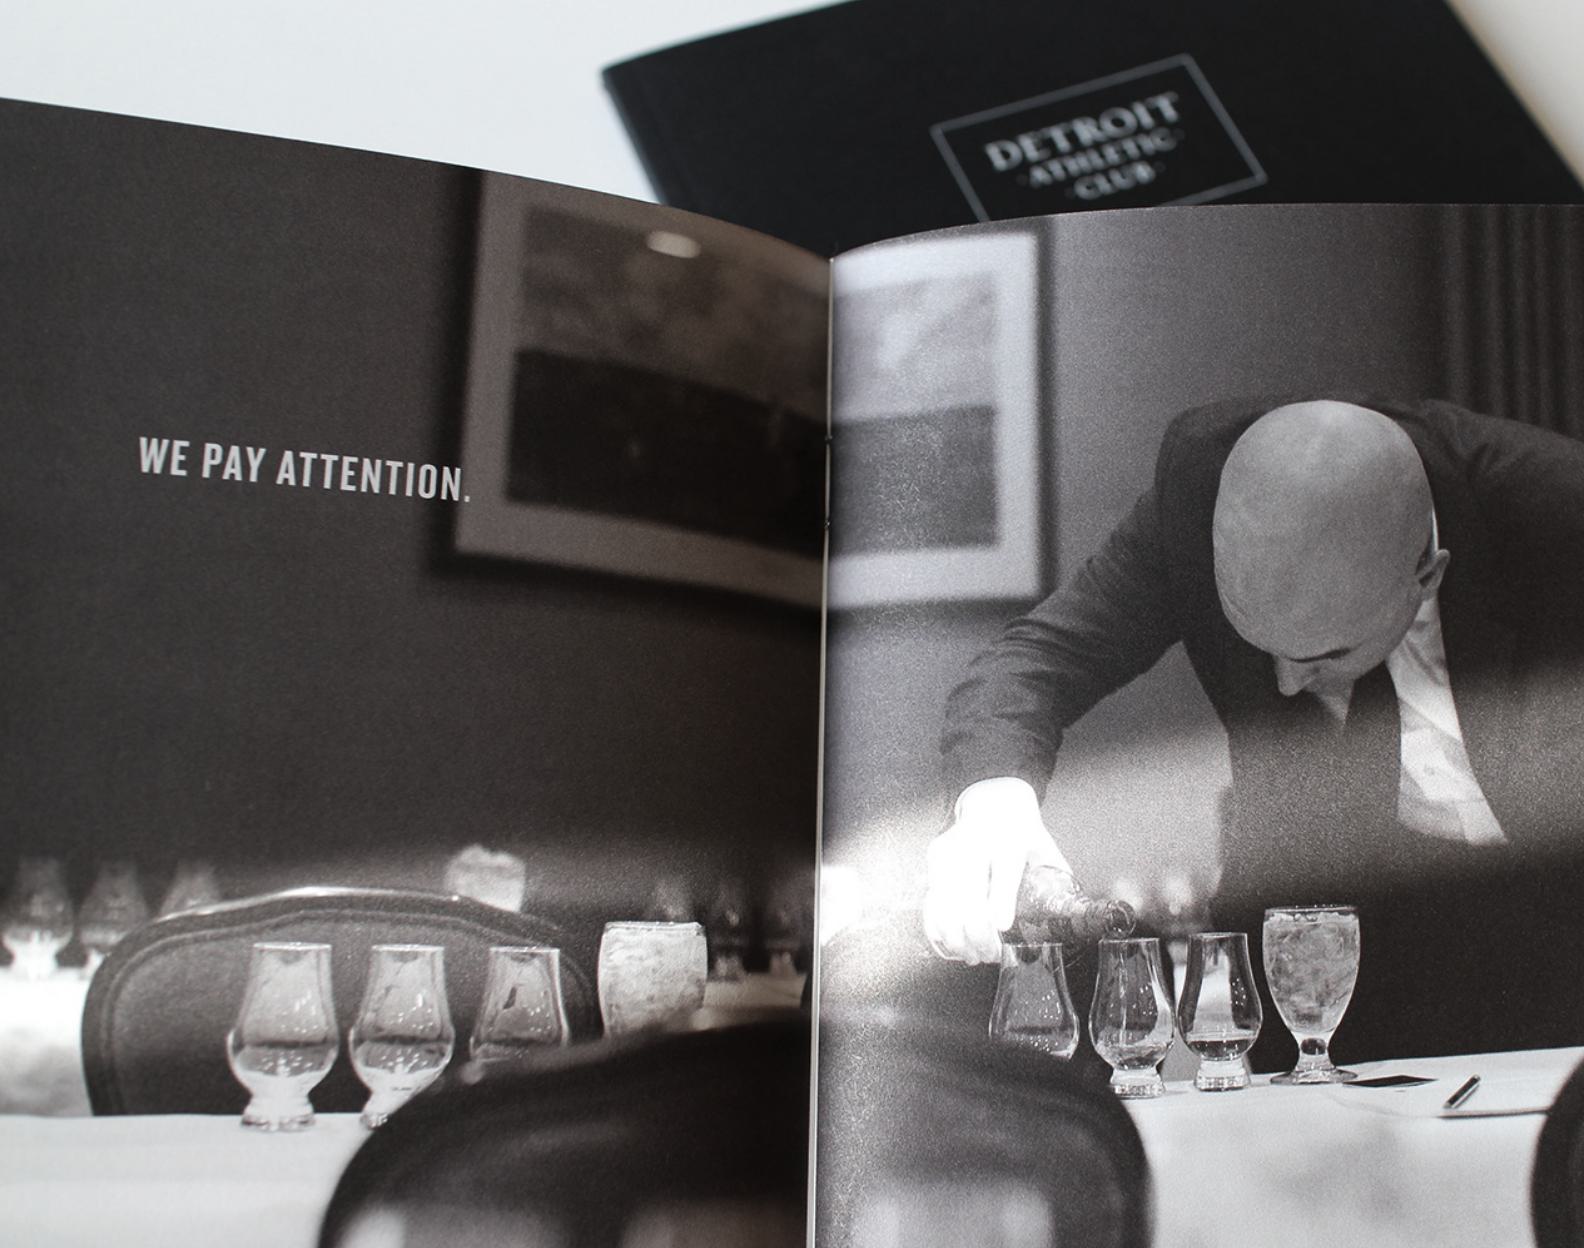 A spread from the brand book - 'We pay attention'